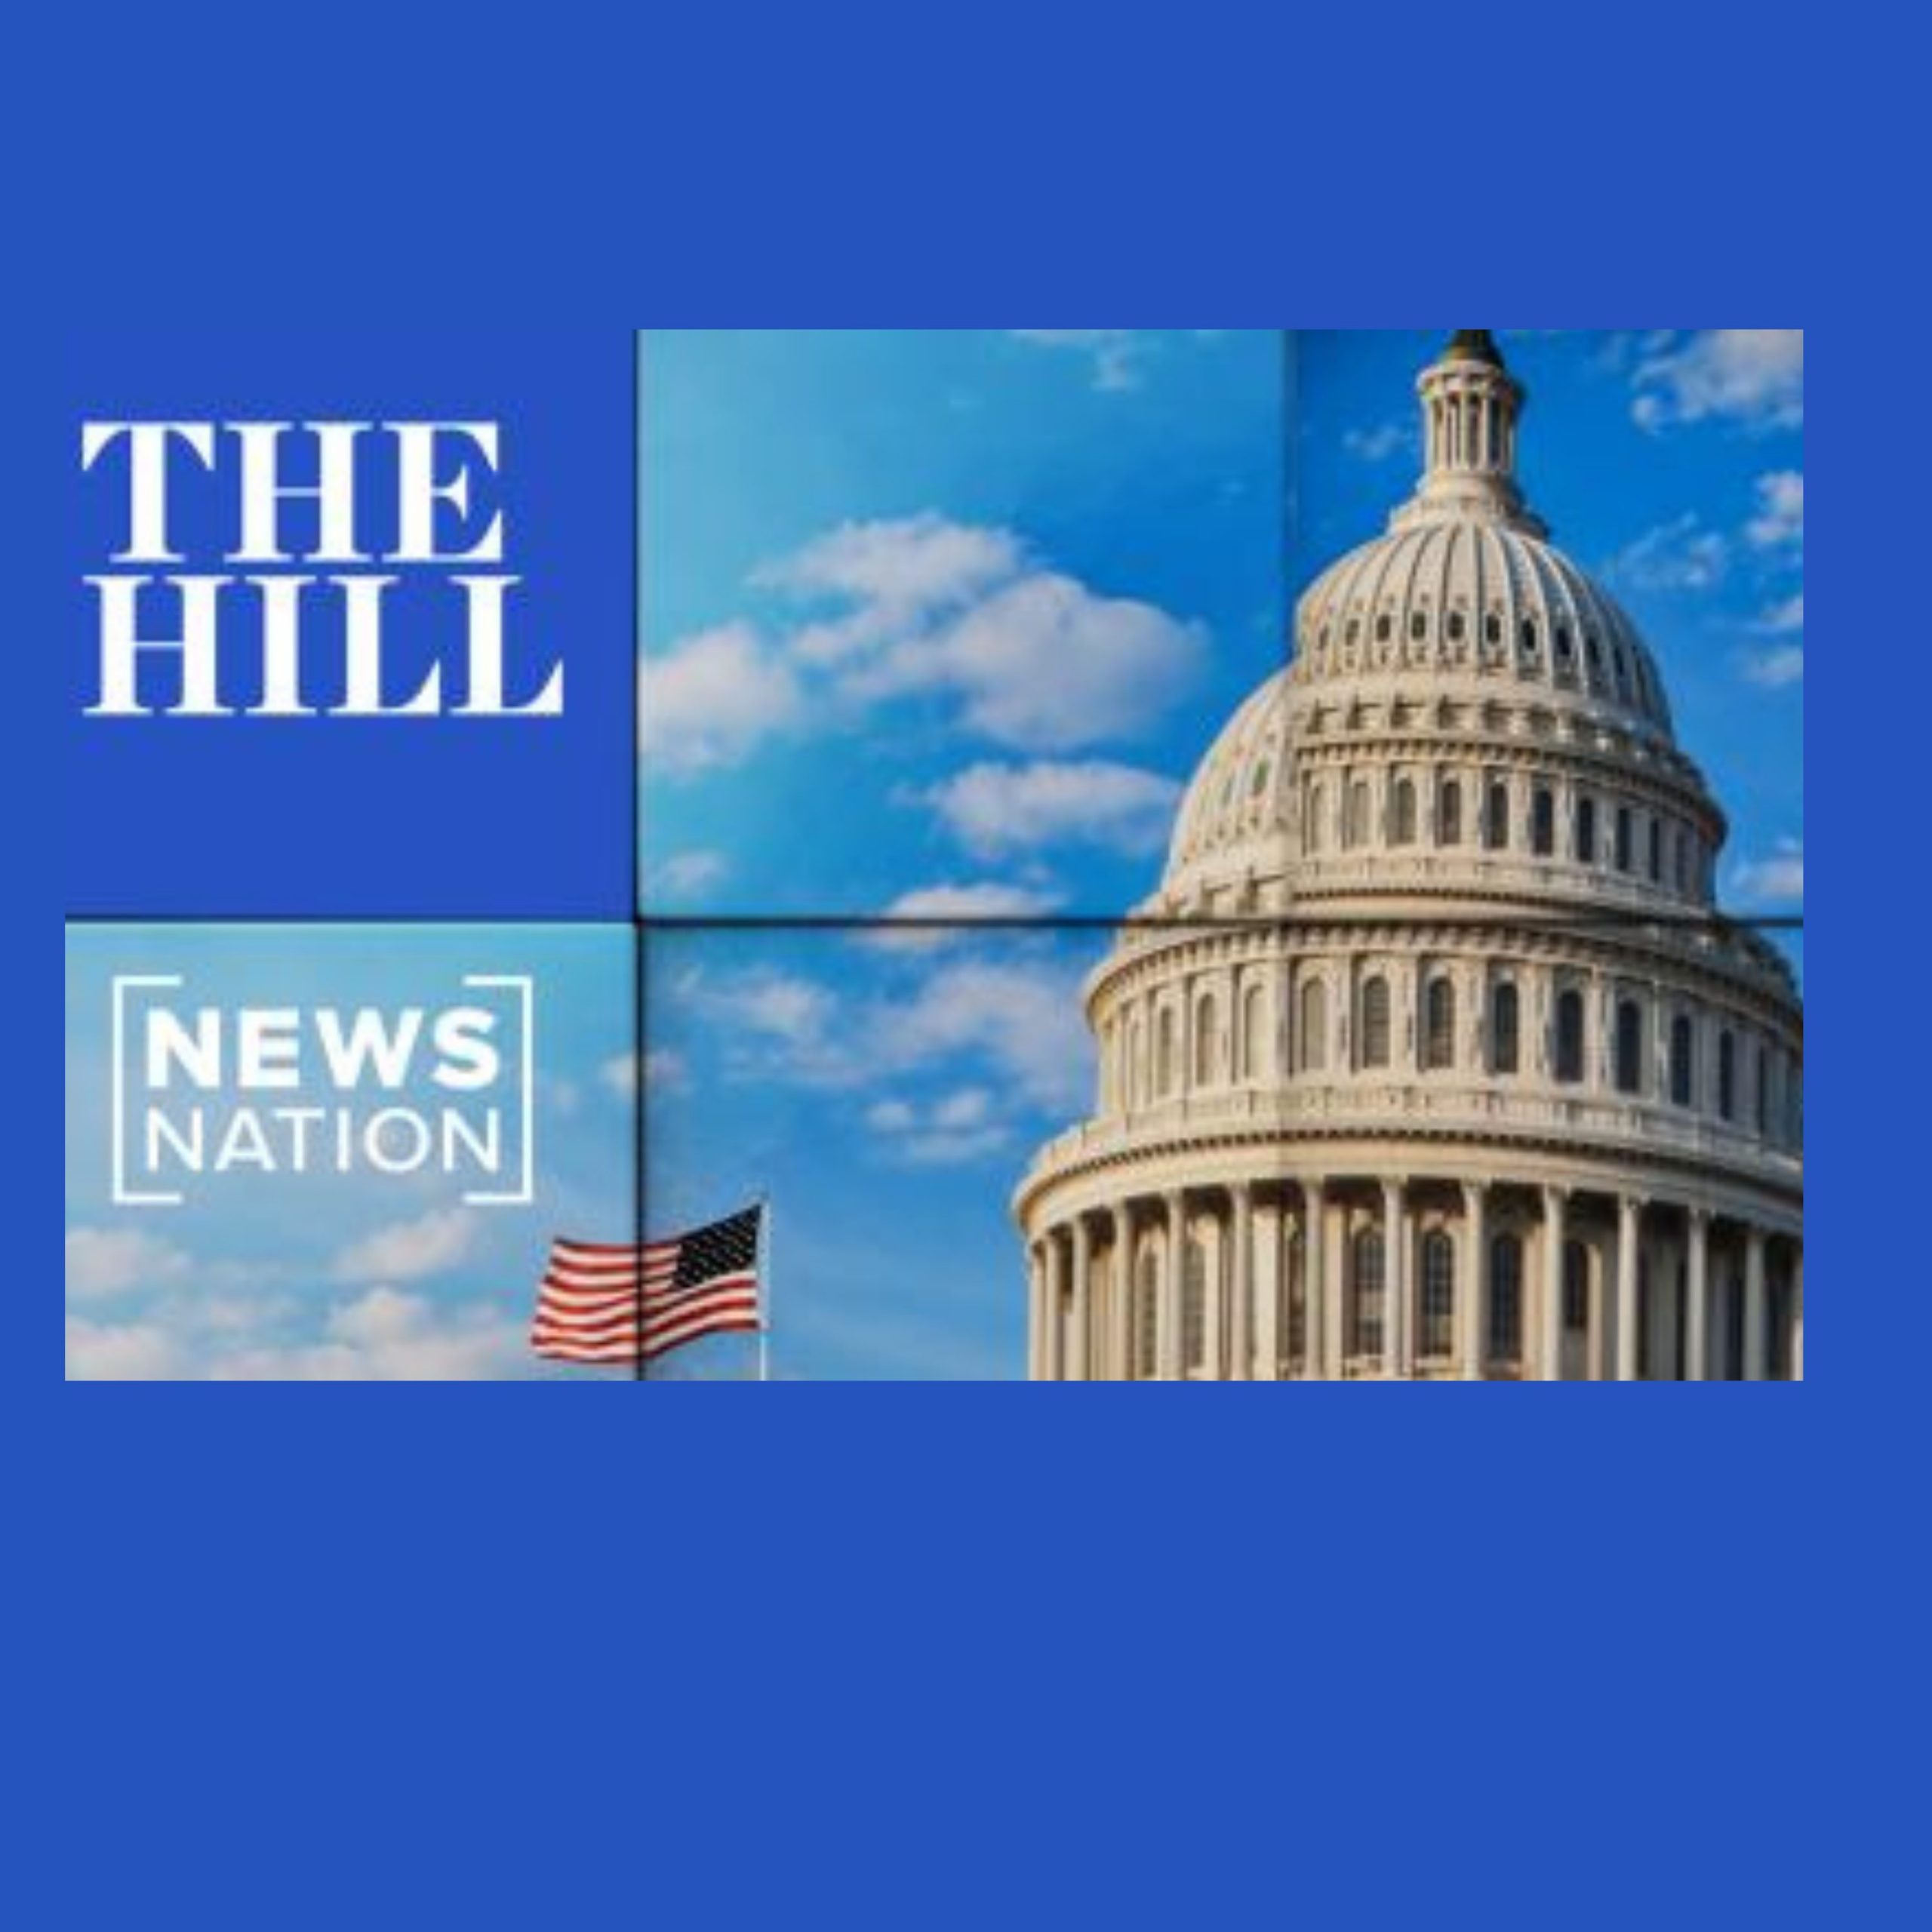 News Nation’s The Hill